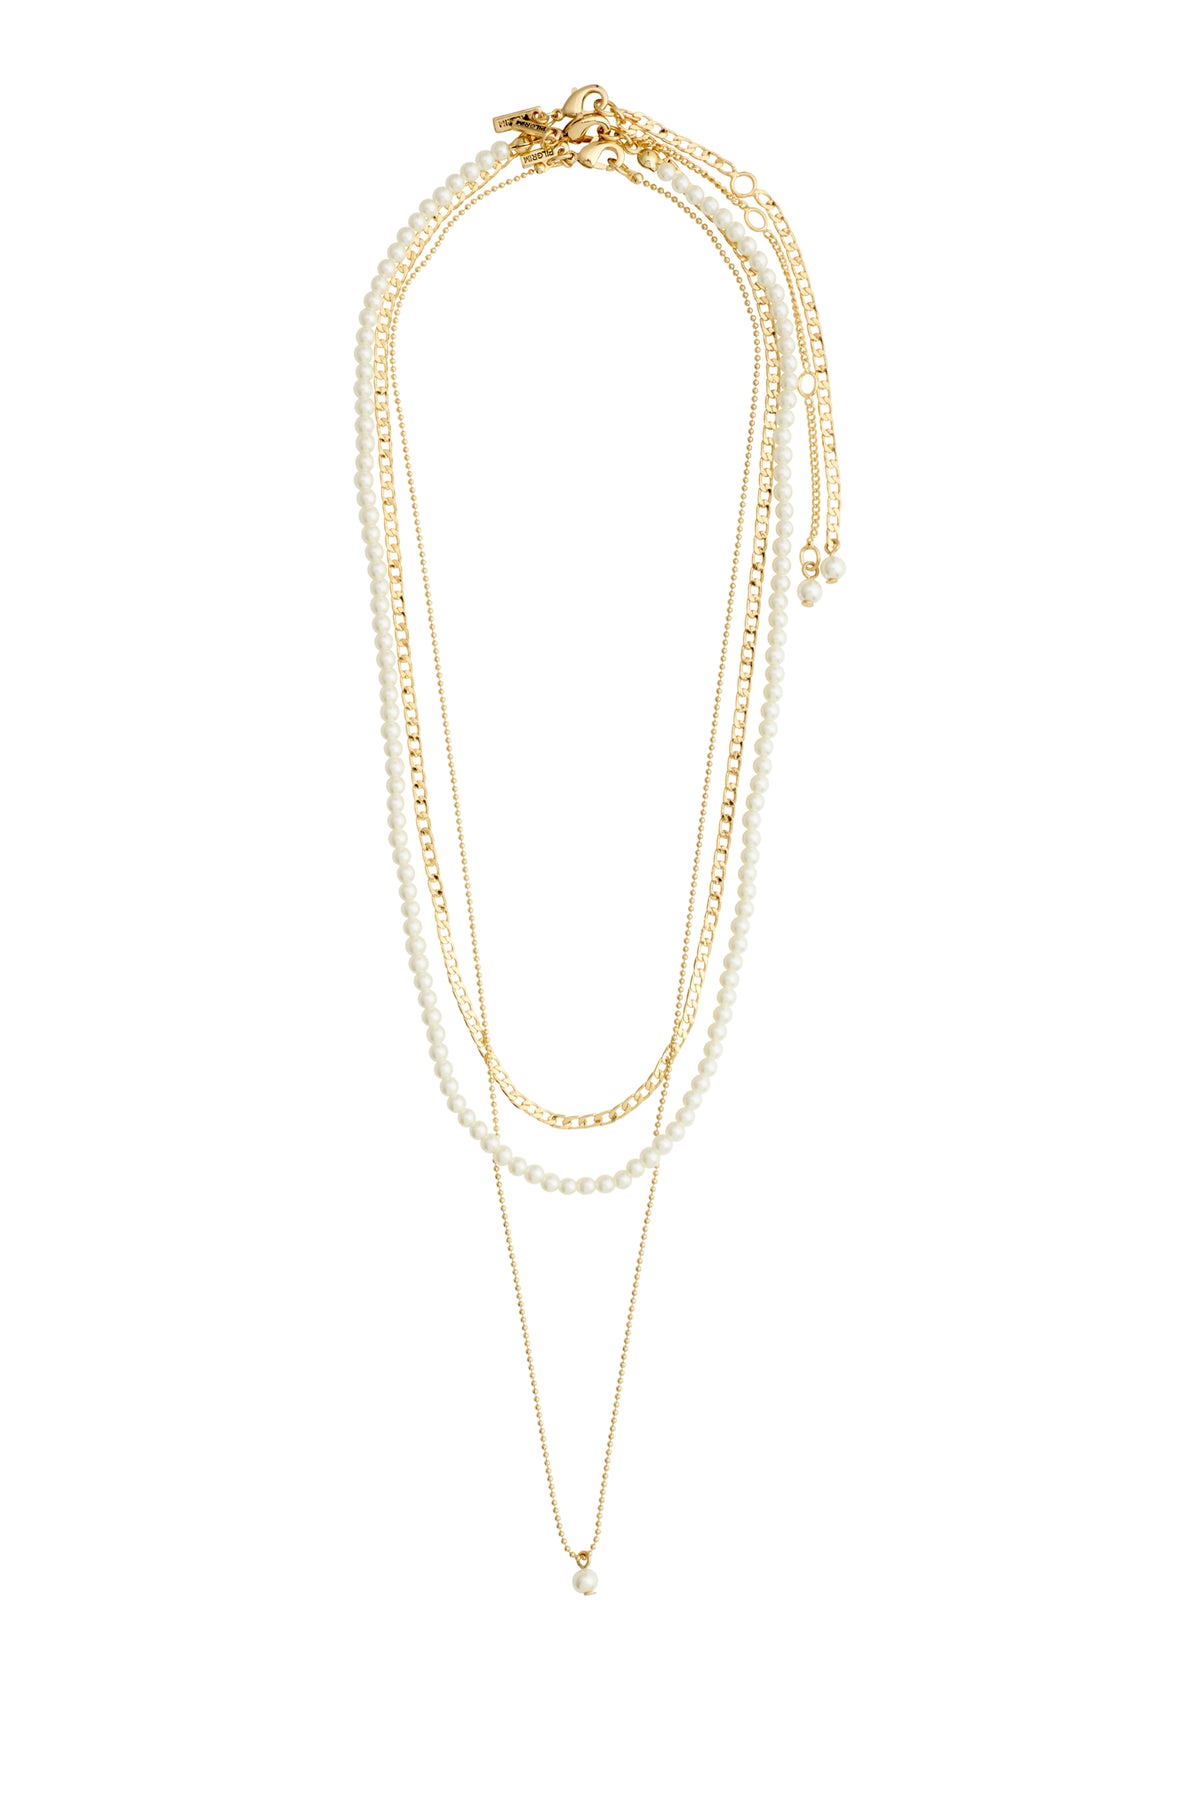 Baker Necklace 3 -In-1 Set - Gold Plated